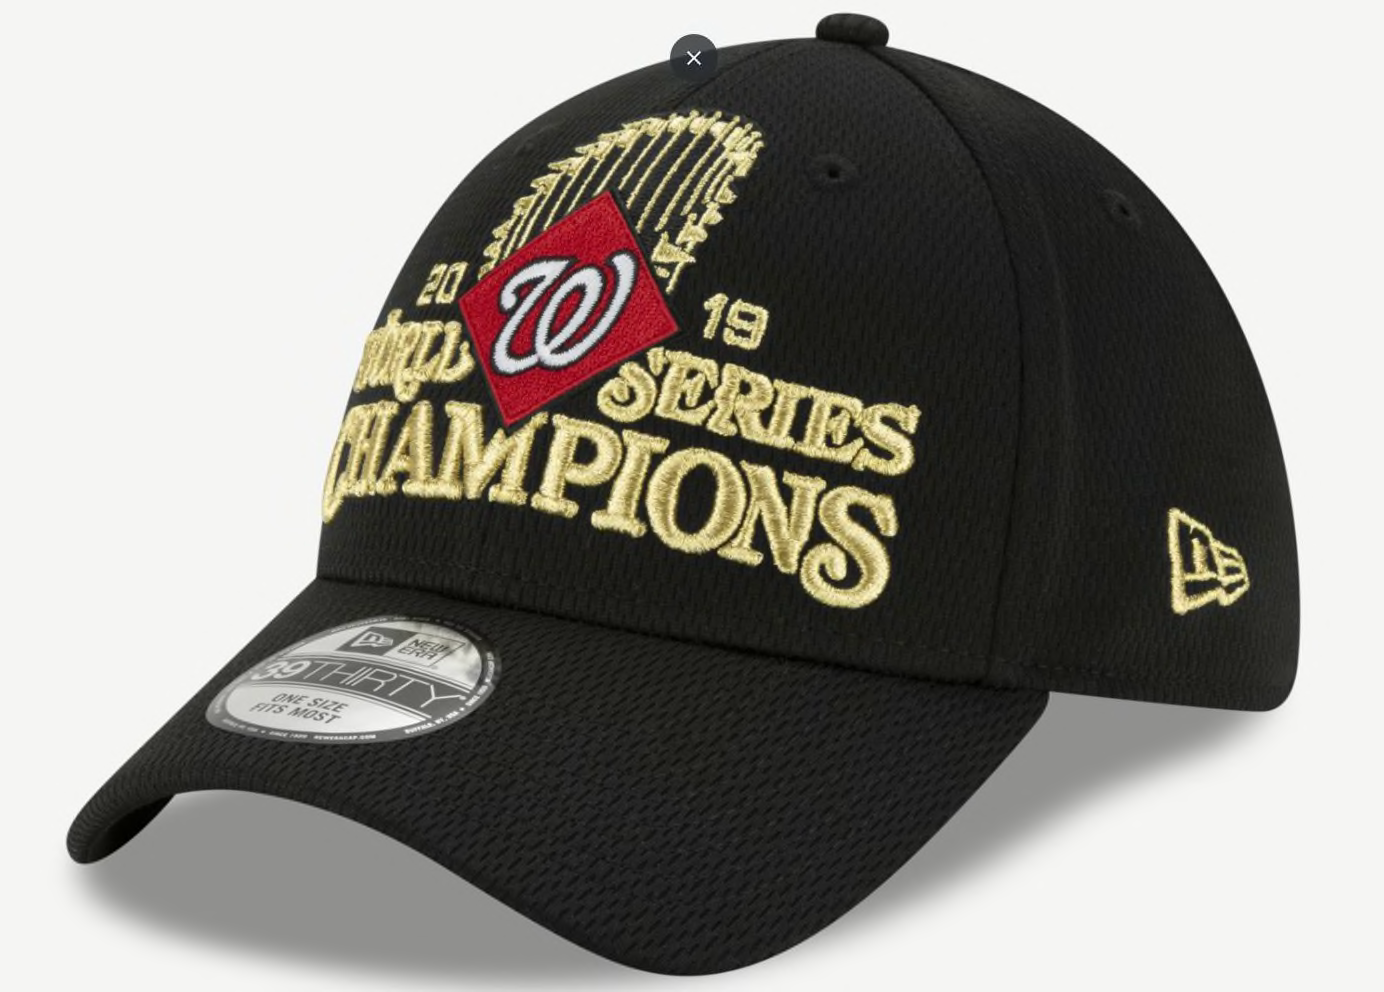 nationals world series champs gear